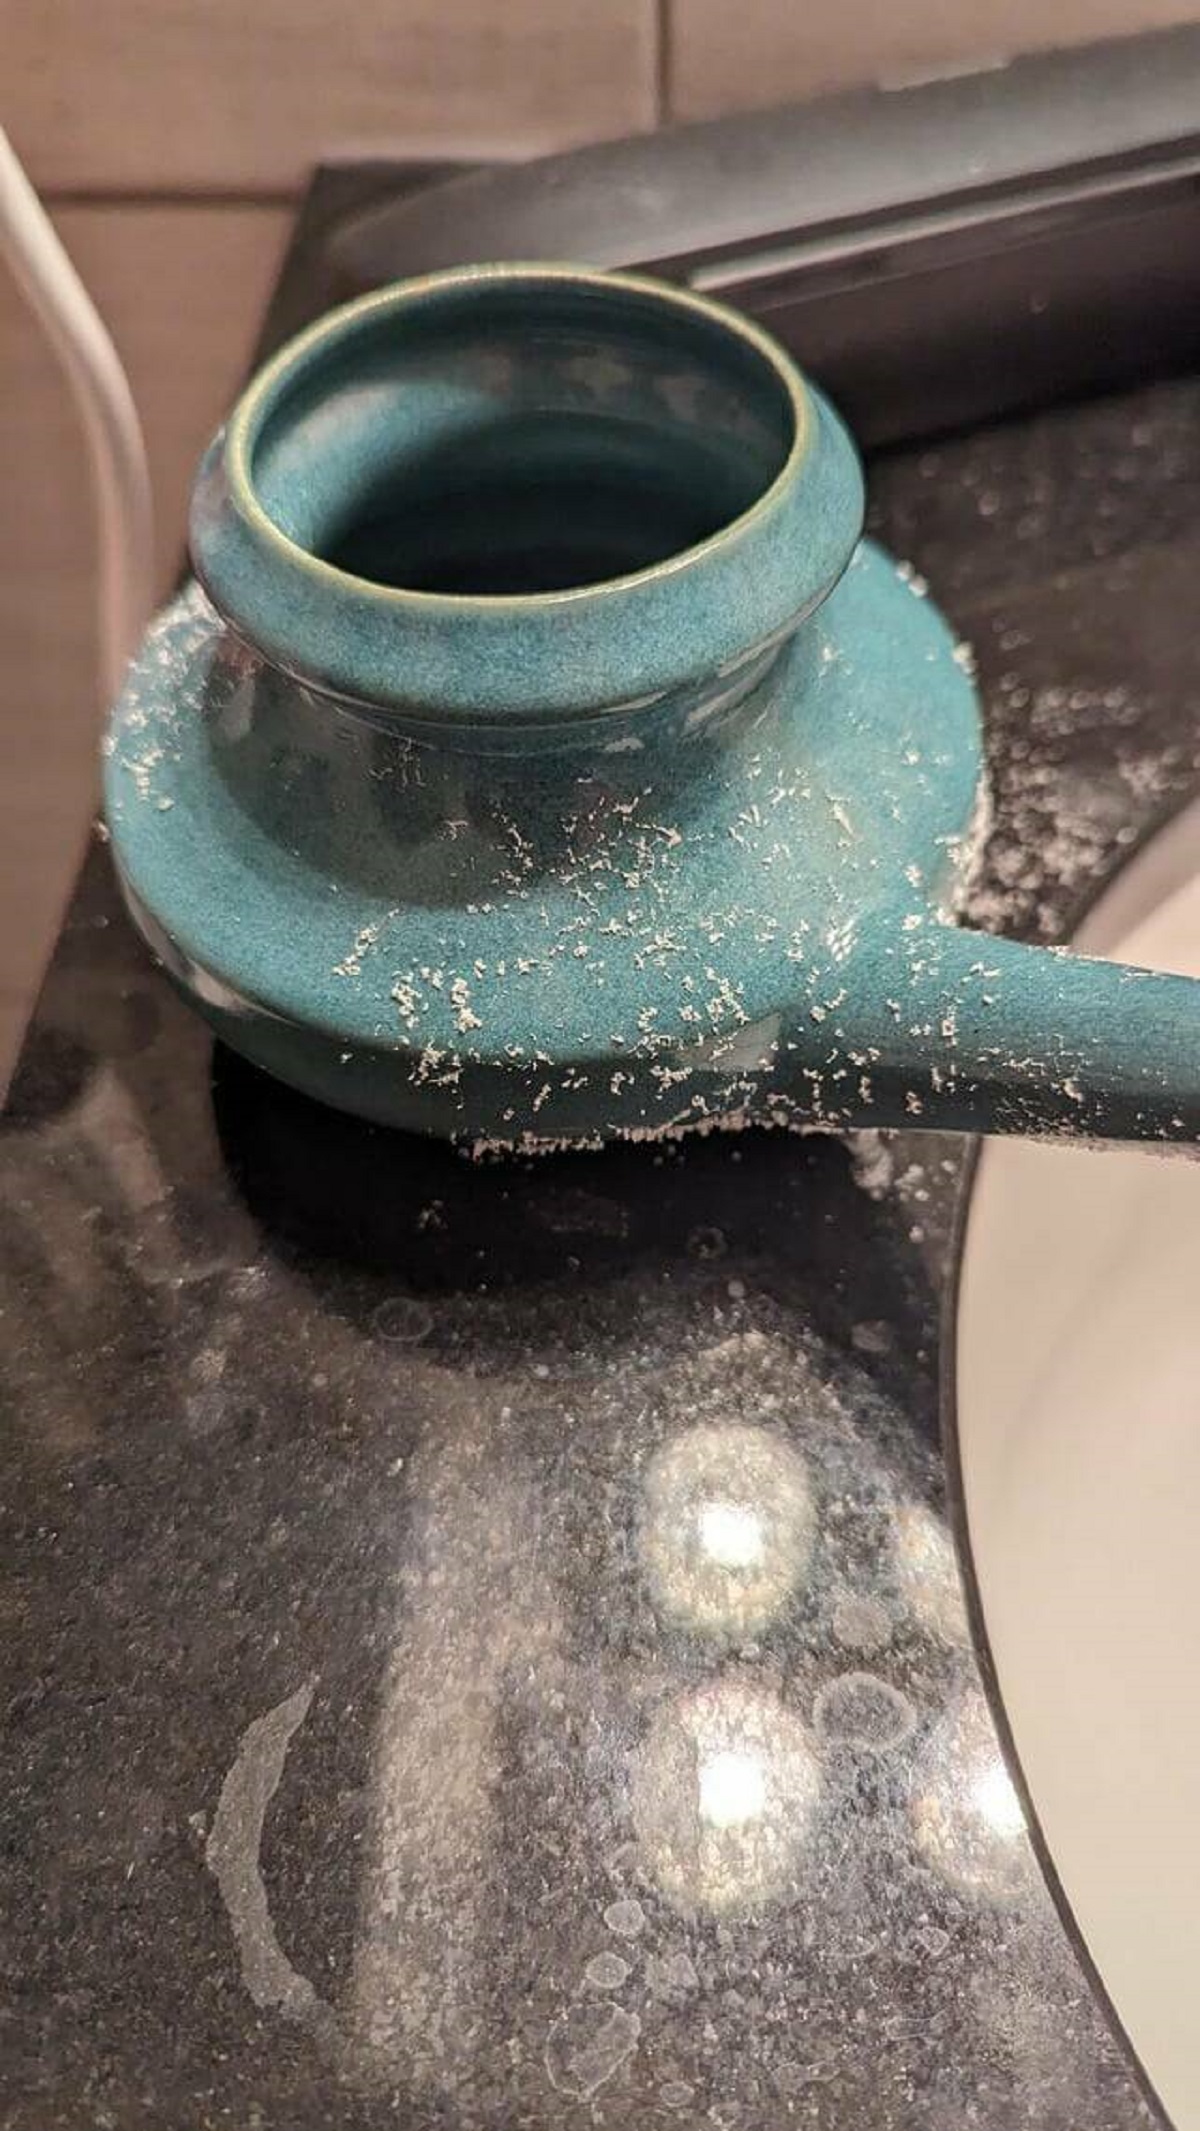 "Left my nedi pot half filled overnight and the salt phased through the ceramic"